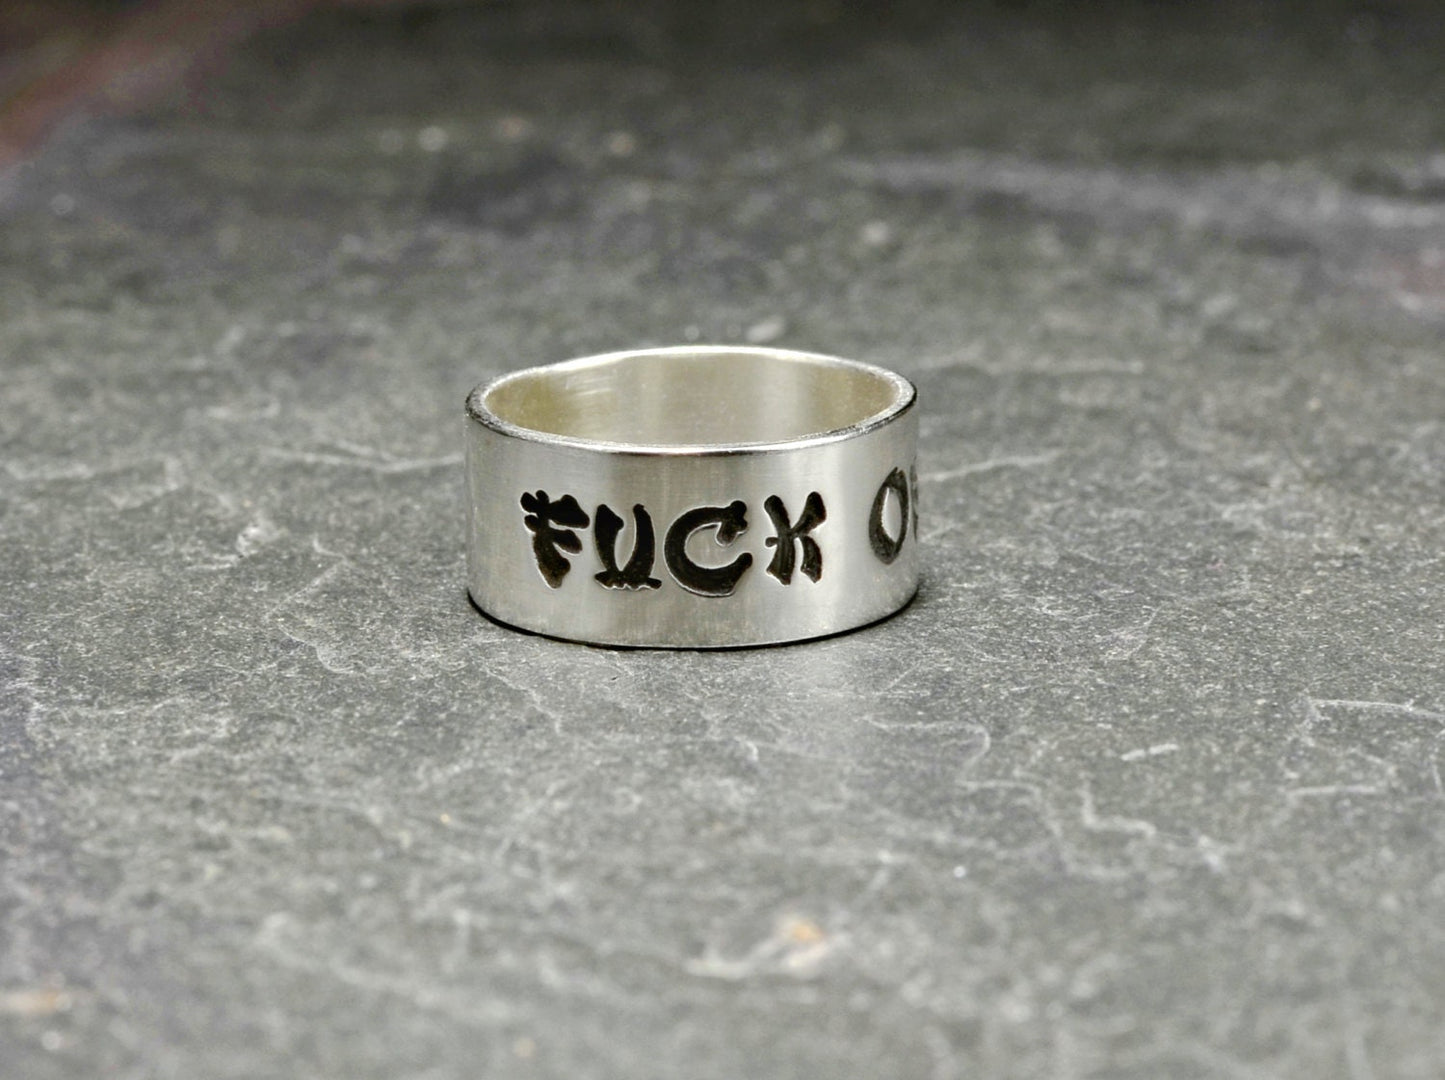 F'ck off sterling silver ring in Geisha font